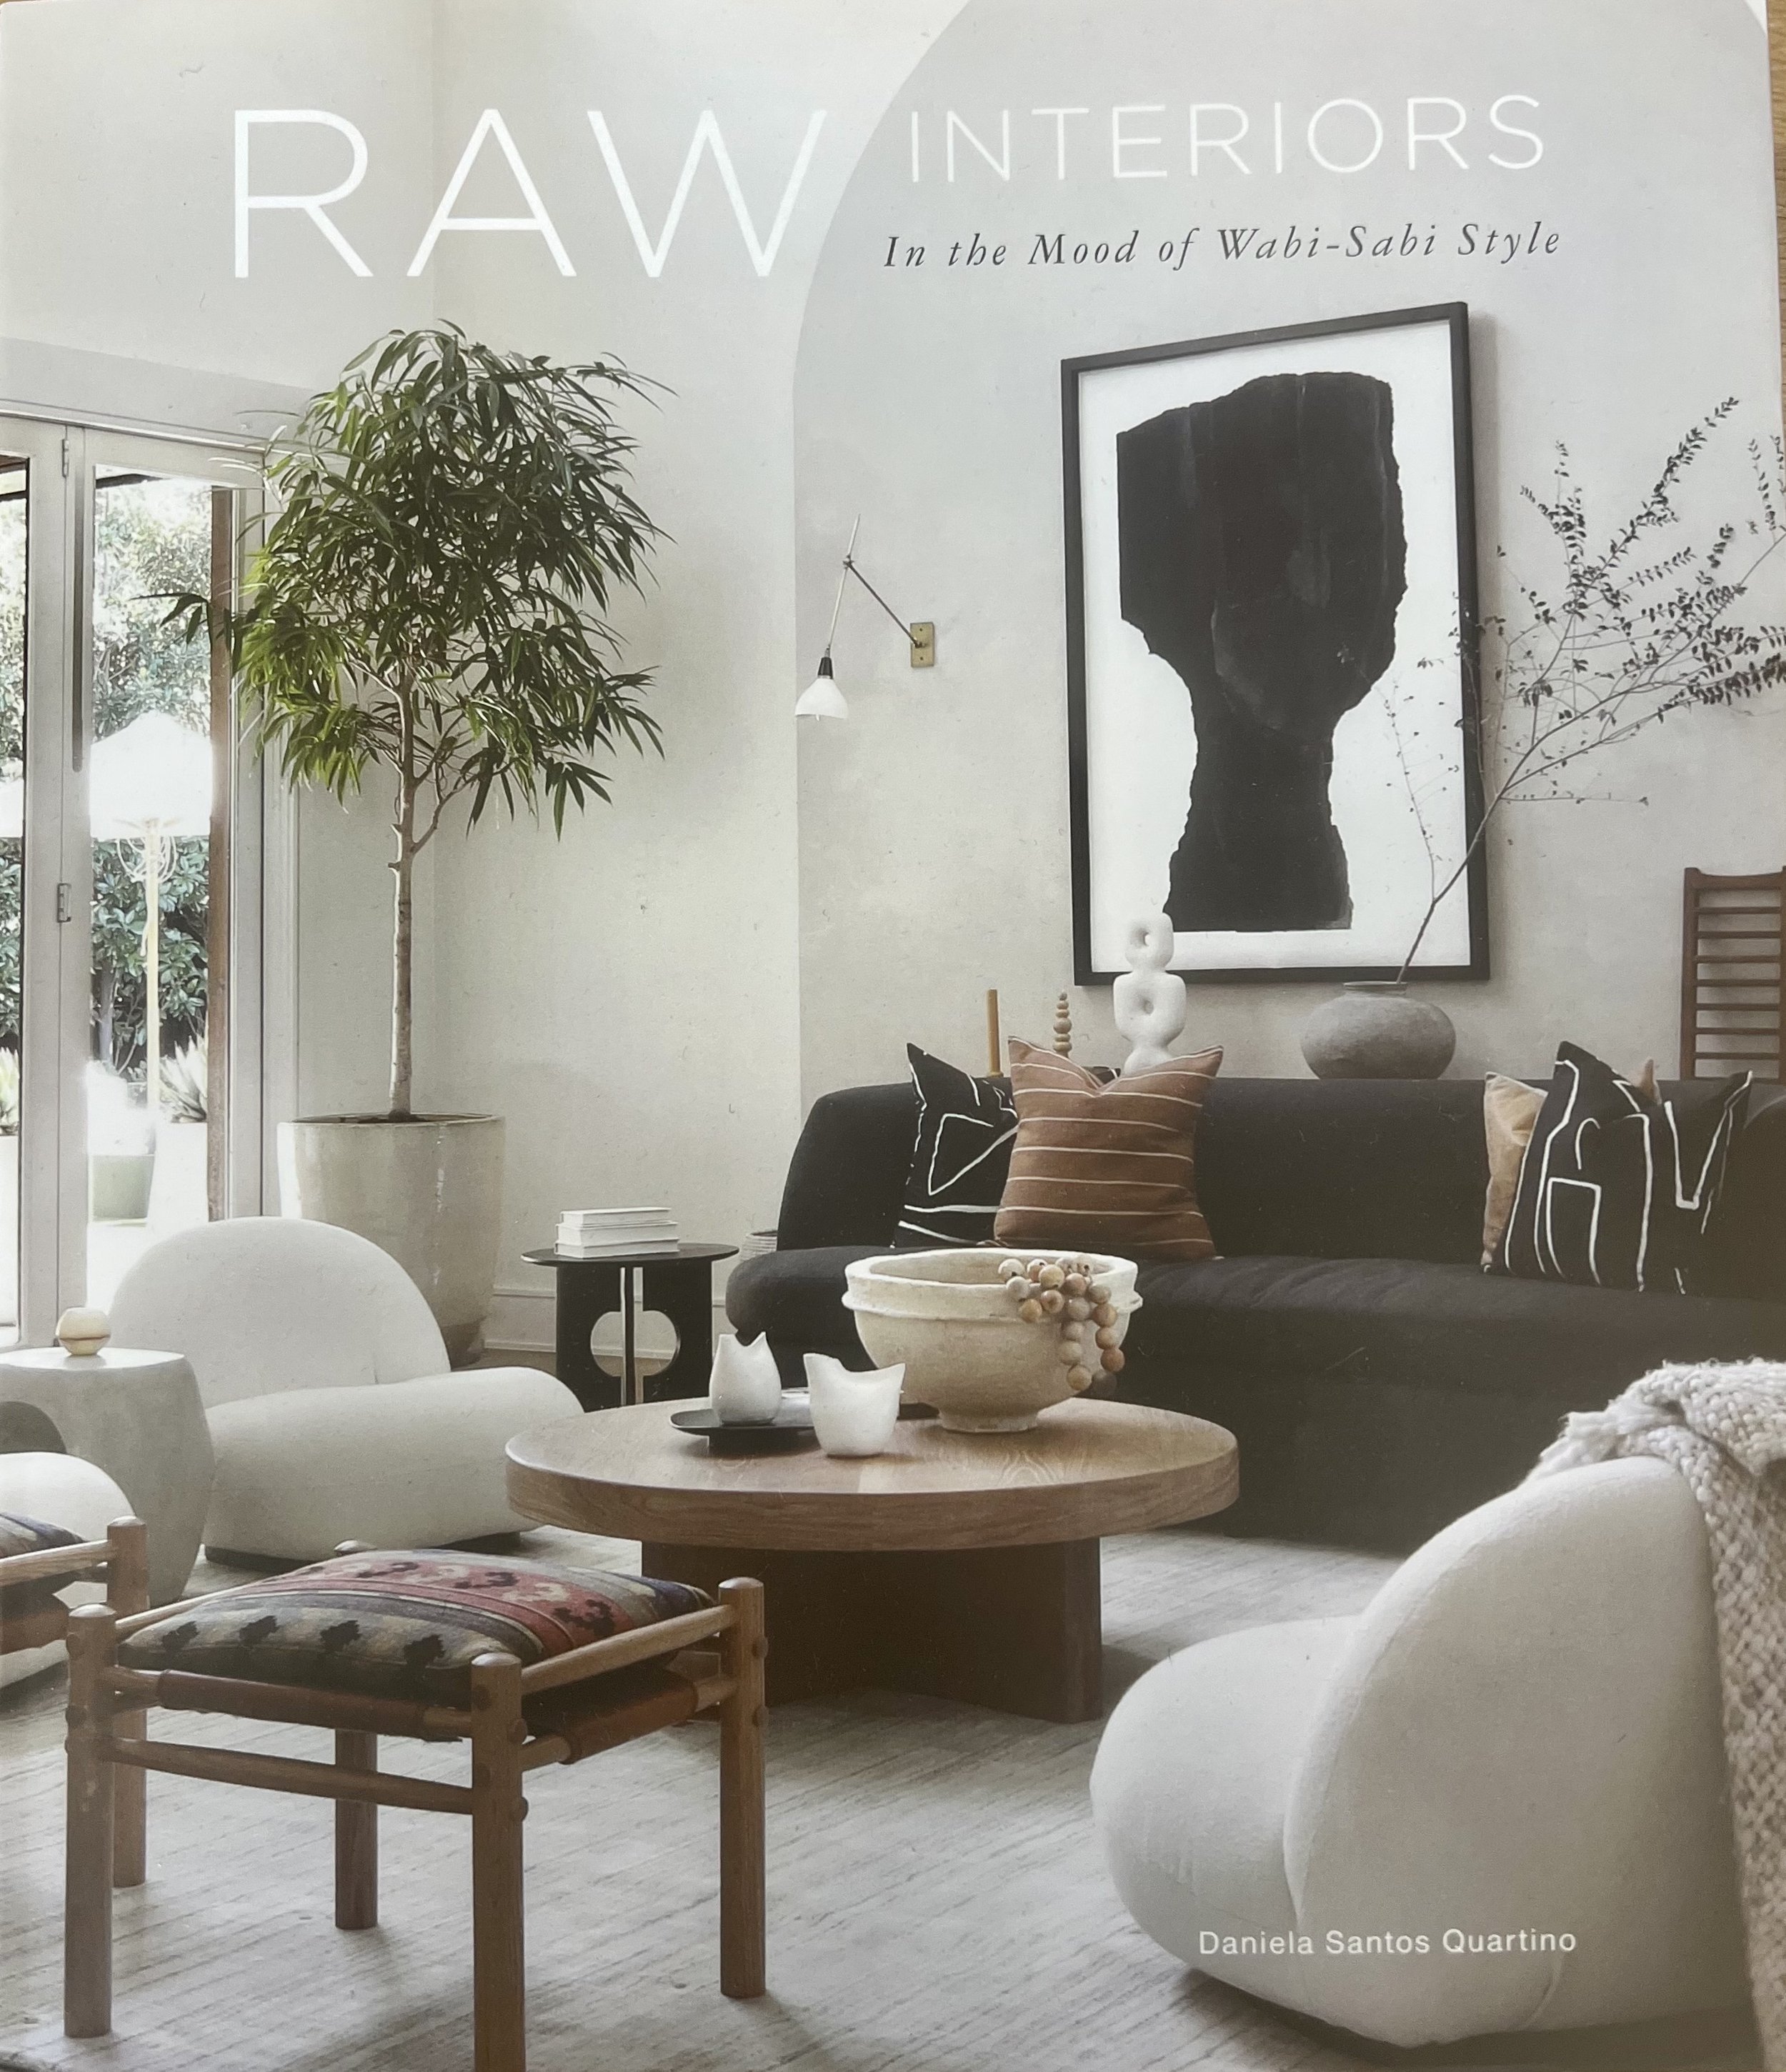 Urbanology Designs featured in Raw Interiors book that showcases projects inspired in wabi sabi